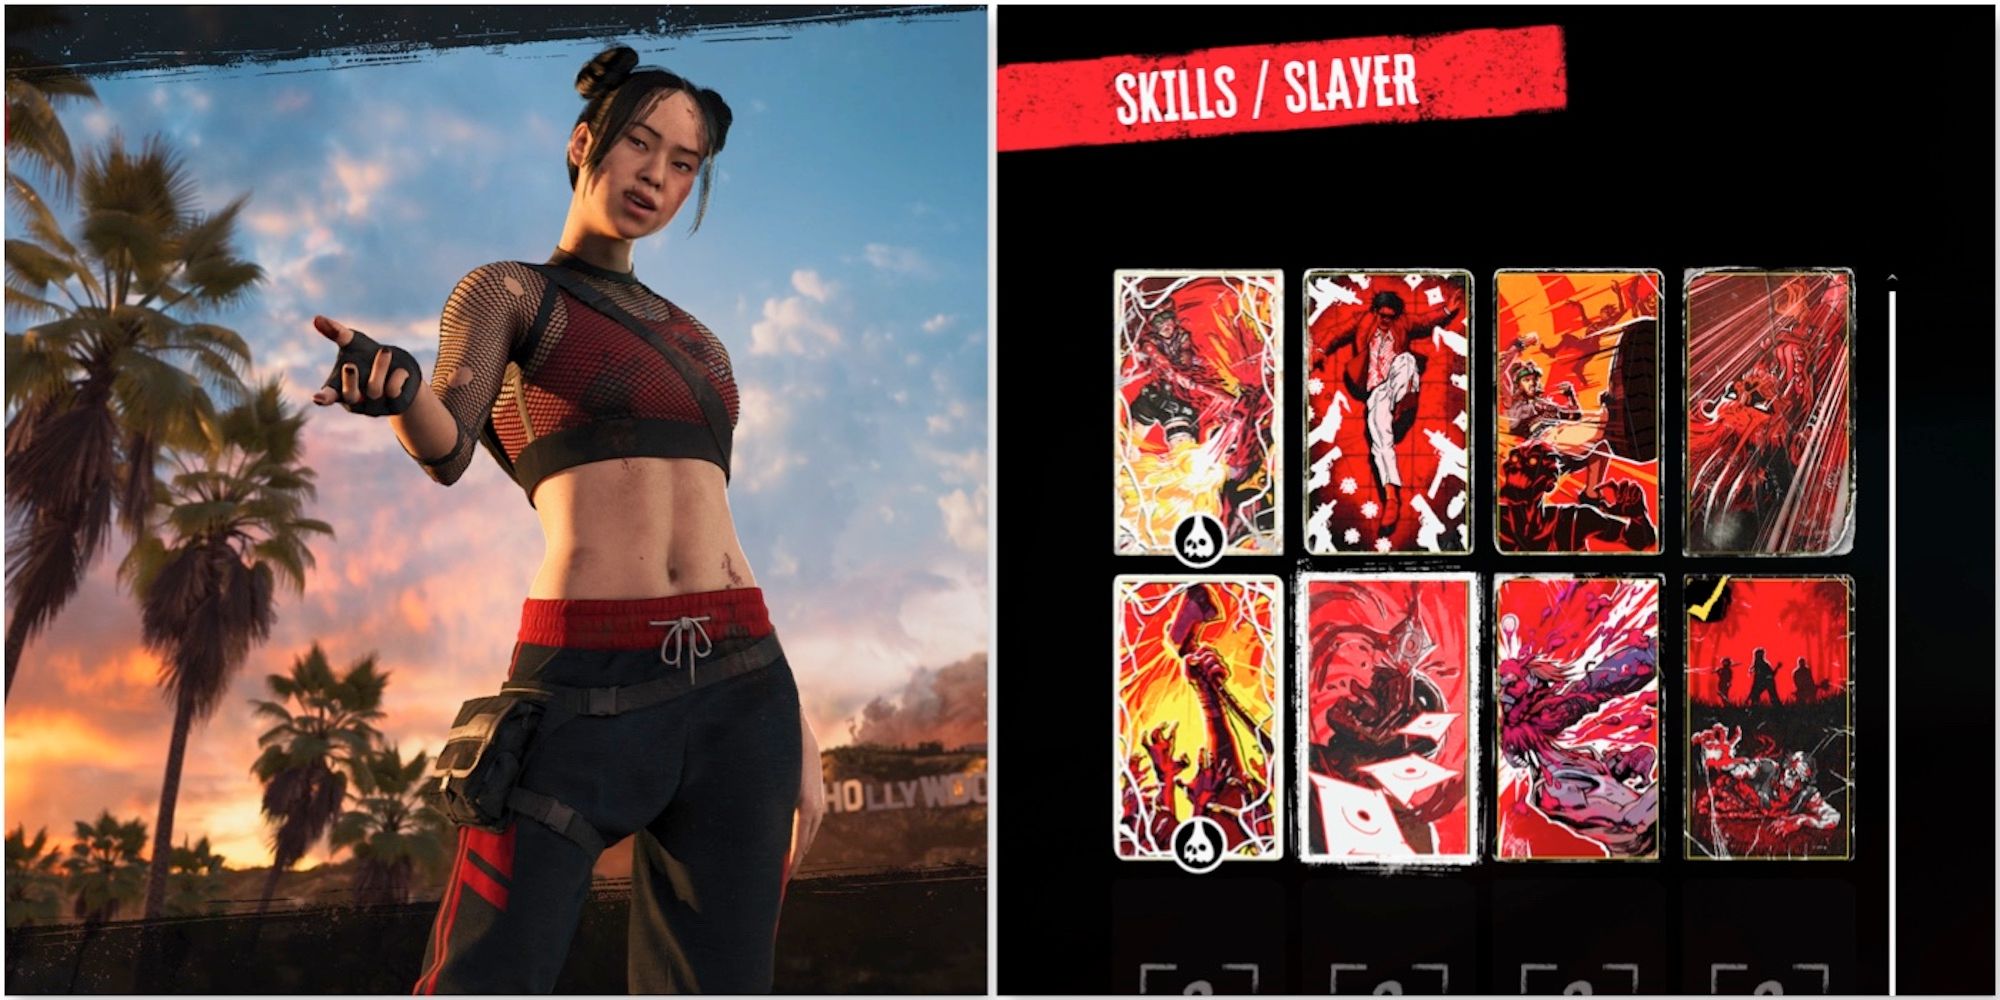 Amy and skill cards in Dead Island 2